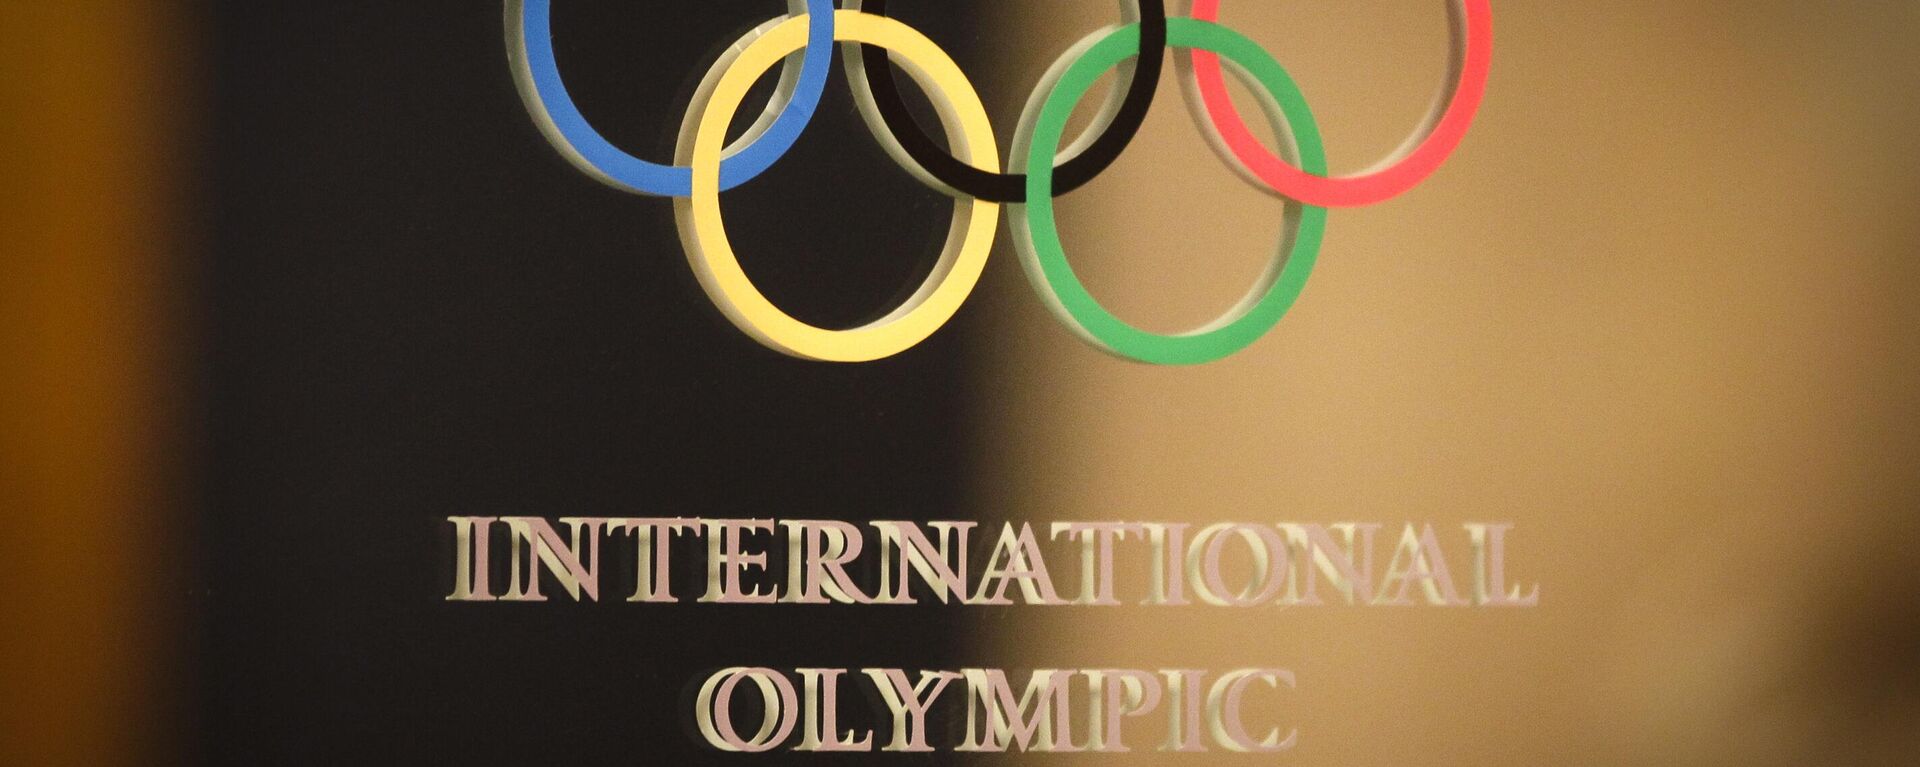 The International Olympic Committee (IOC) logo is seen on the door at a meeting of the IOC Executive Board at a hotel in London, prior to the 2012 Summer Olympics, Saturday, July 21, 2012 - Sputnik International, 1920, 28.04.2024